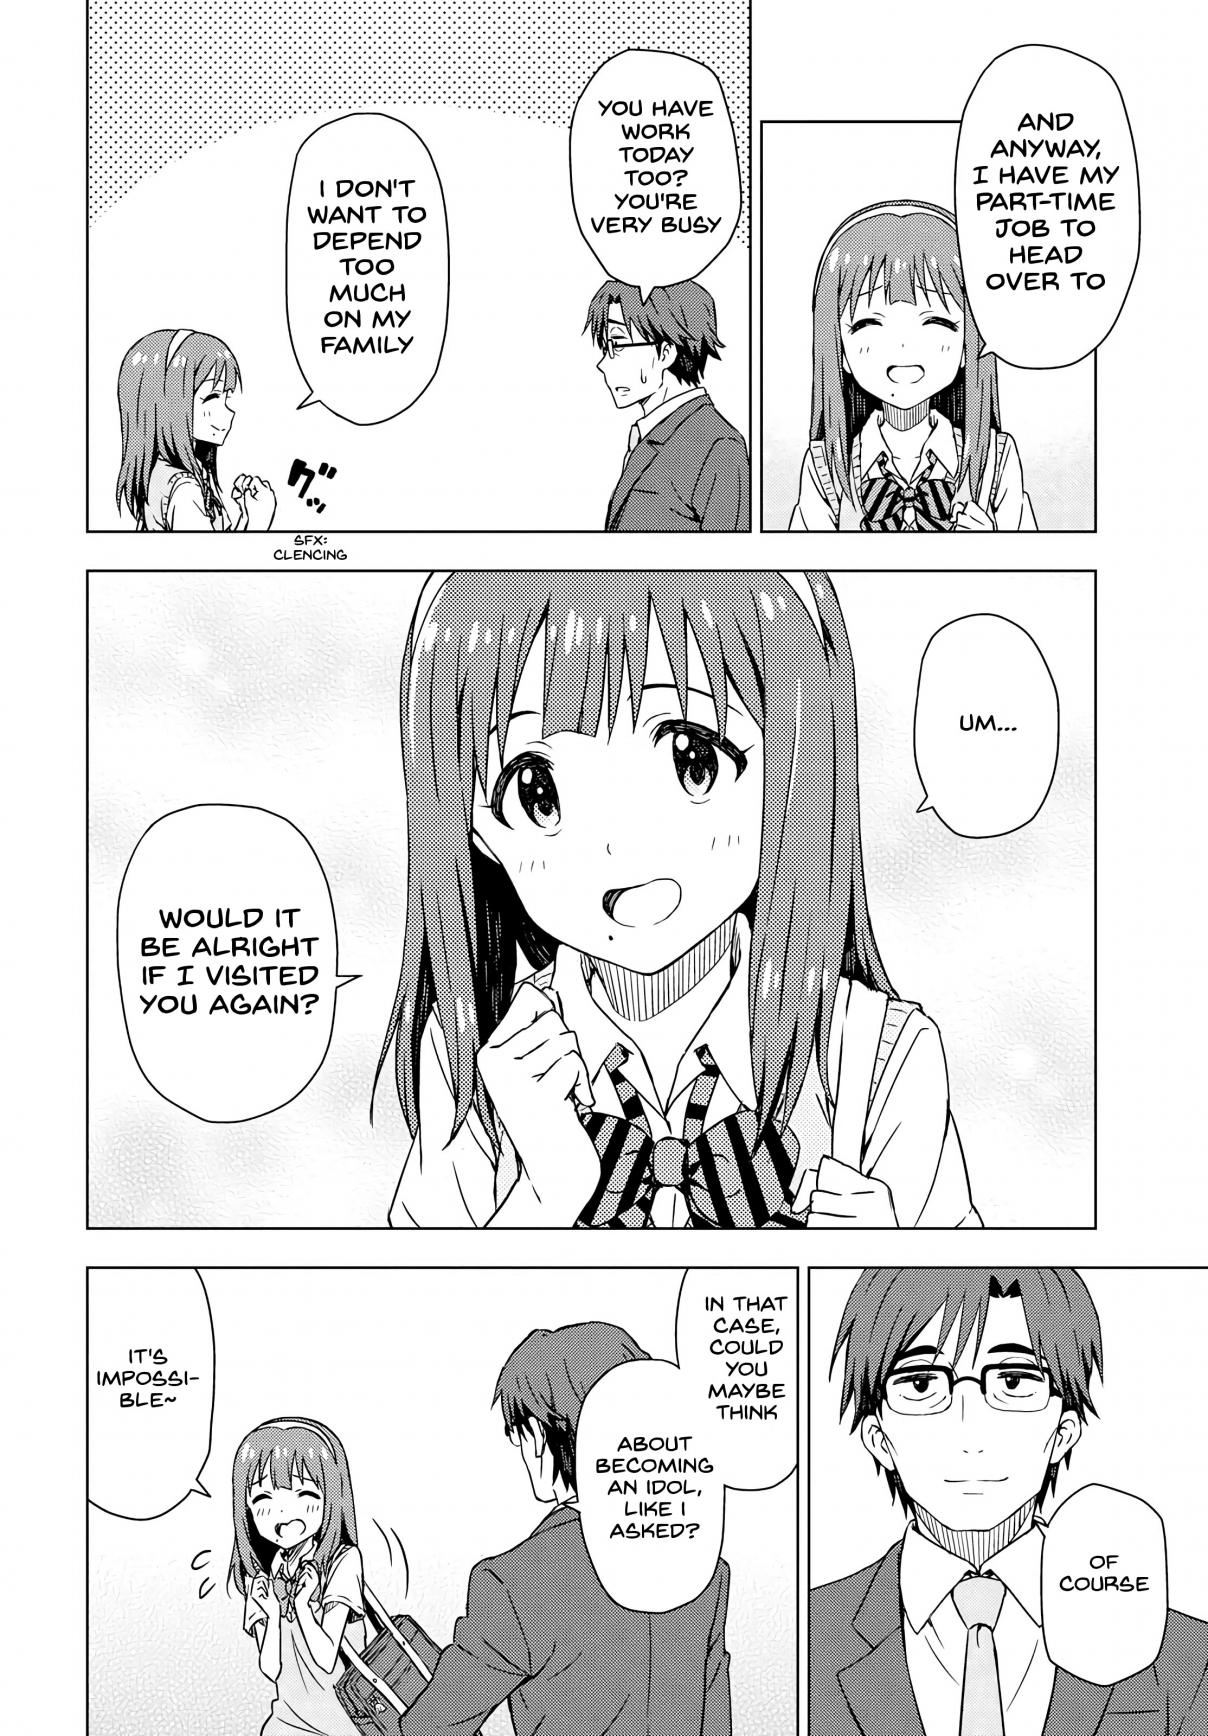 THE iDOLM@STER: Asayake wa Koganeiro Ch. 5 Carrying the Wishes of Her Mother… She Moves Forward.